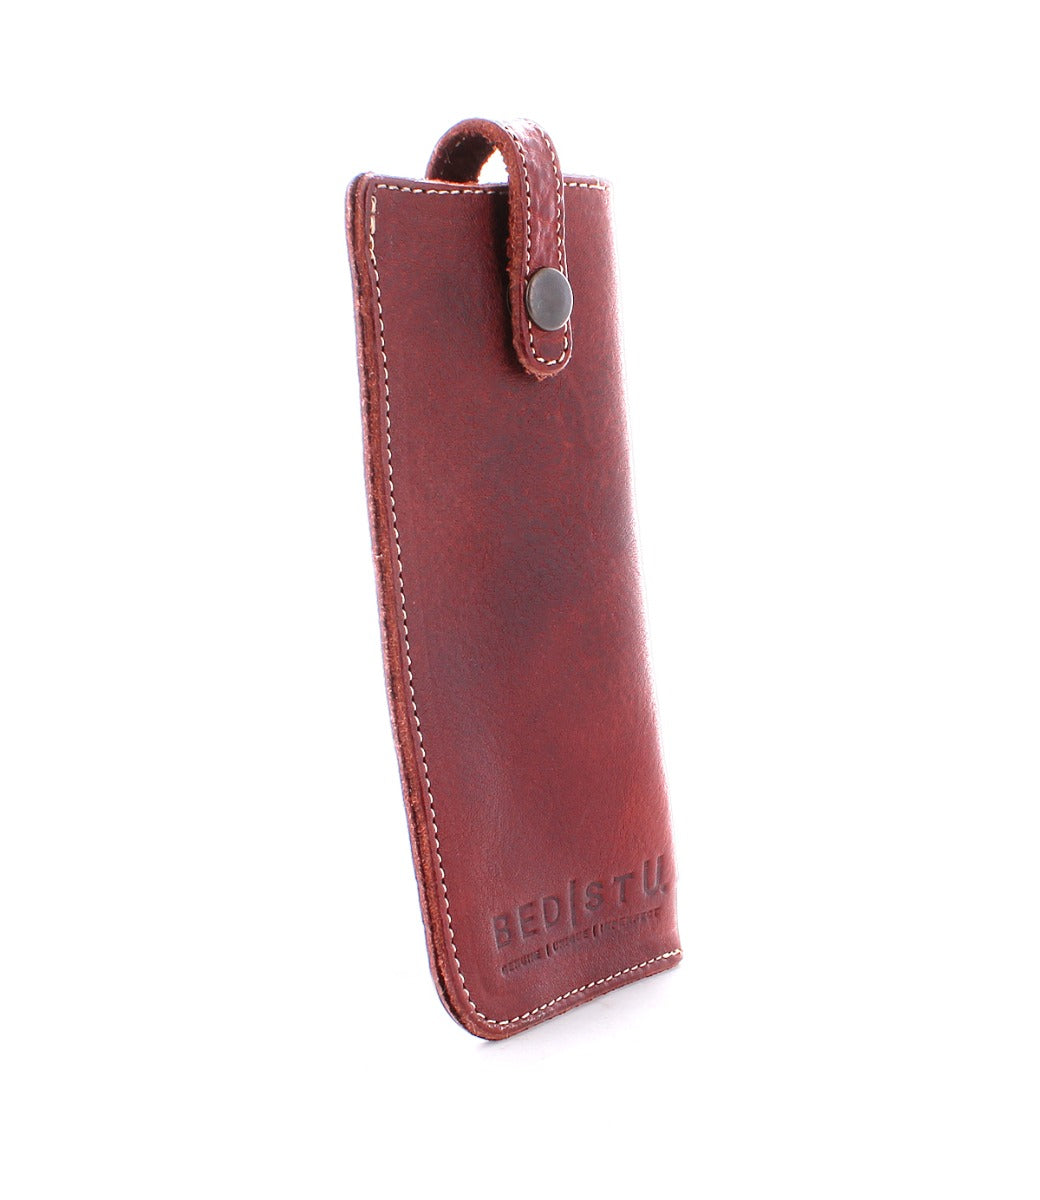 An image of a red leather Bed Stu Behold phone case.